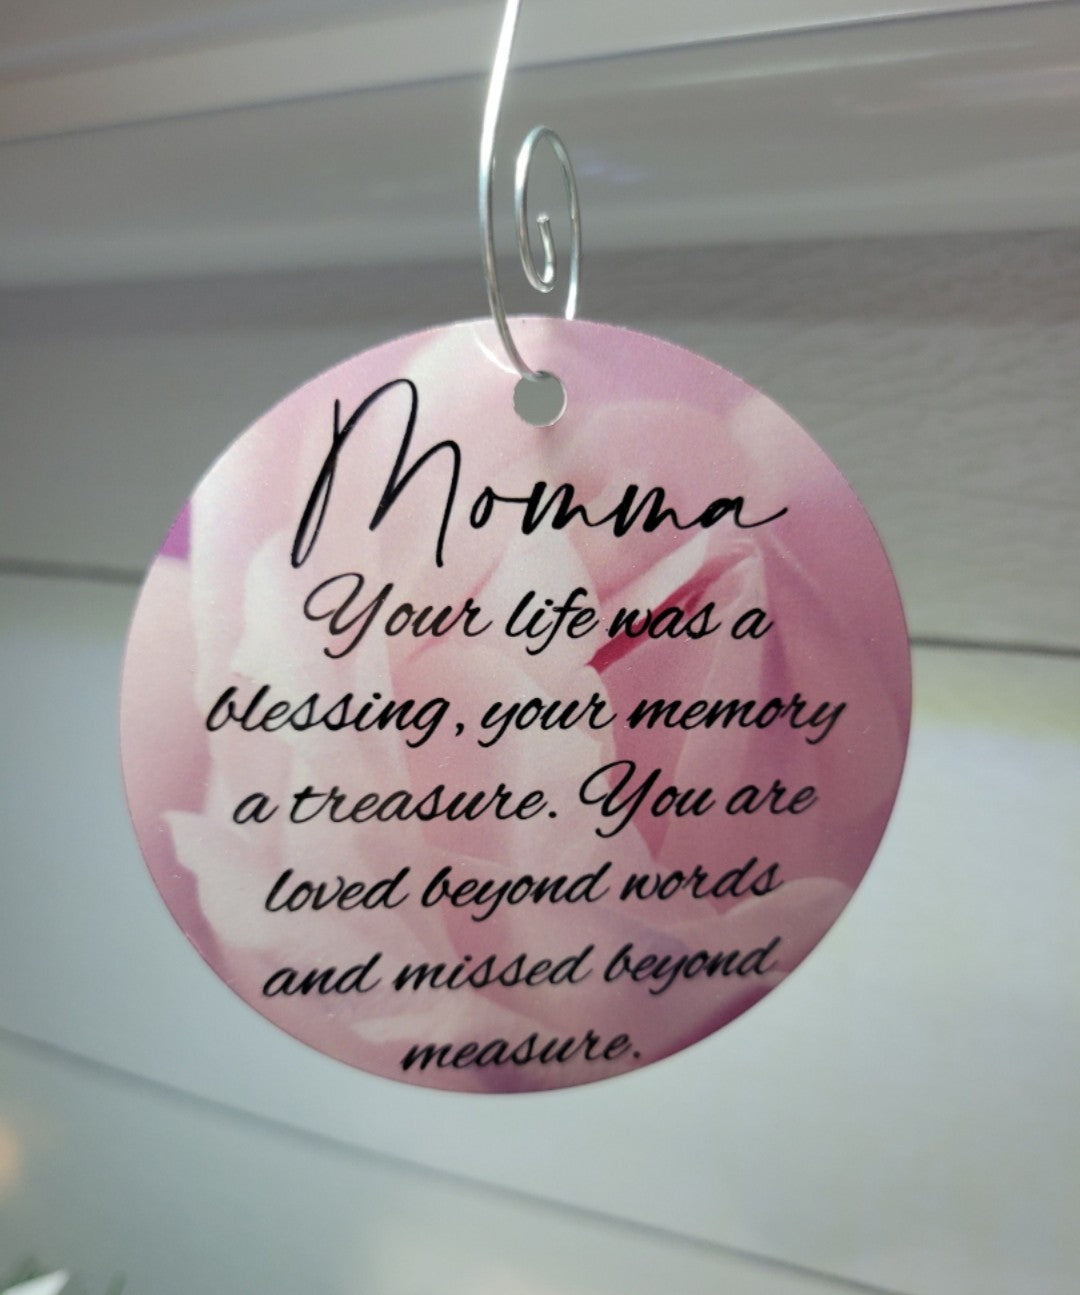 In Loving Memory Photo Ornament, Christmas Ornament, Custom Ornament, Memorial Ornament, Mirror Charm, Photo Charm, Loss of Loved One